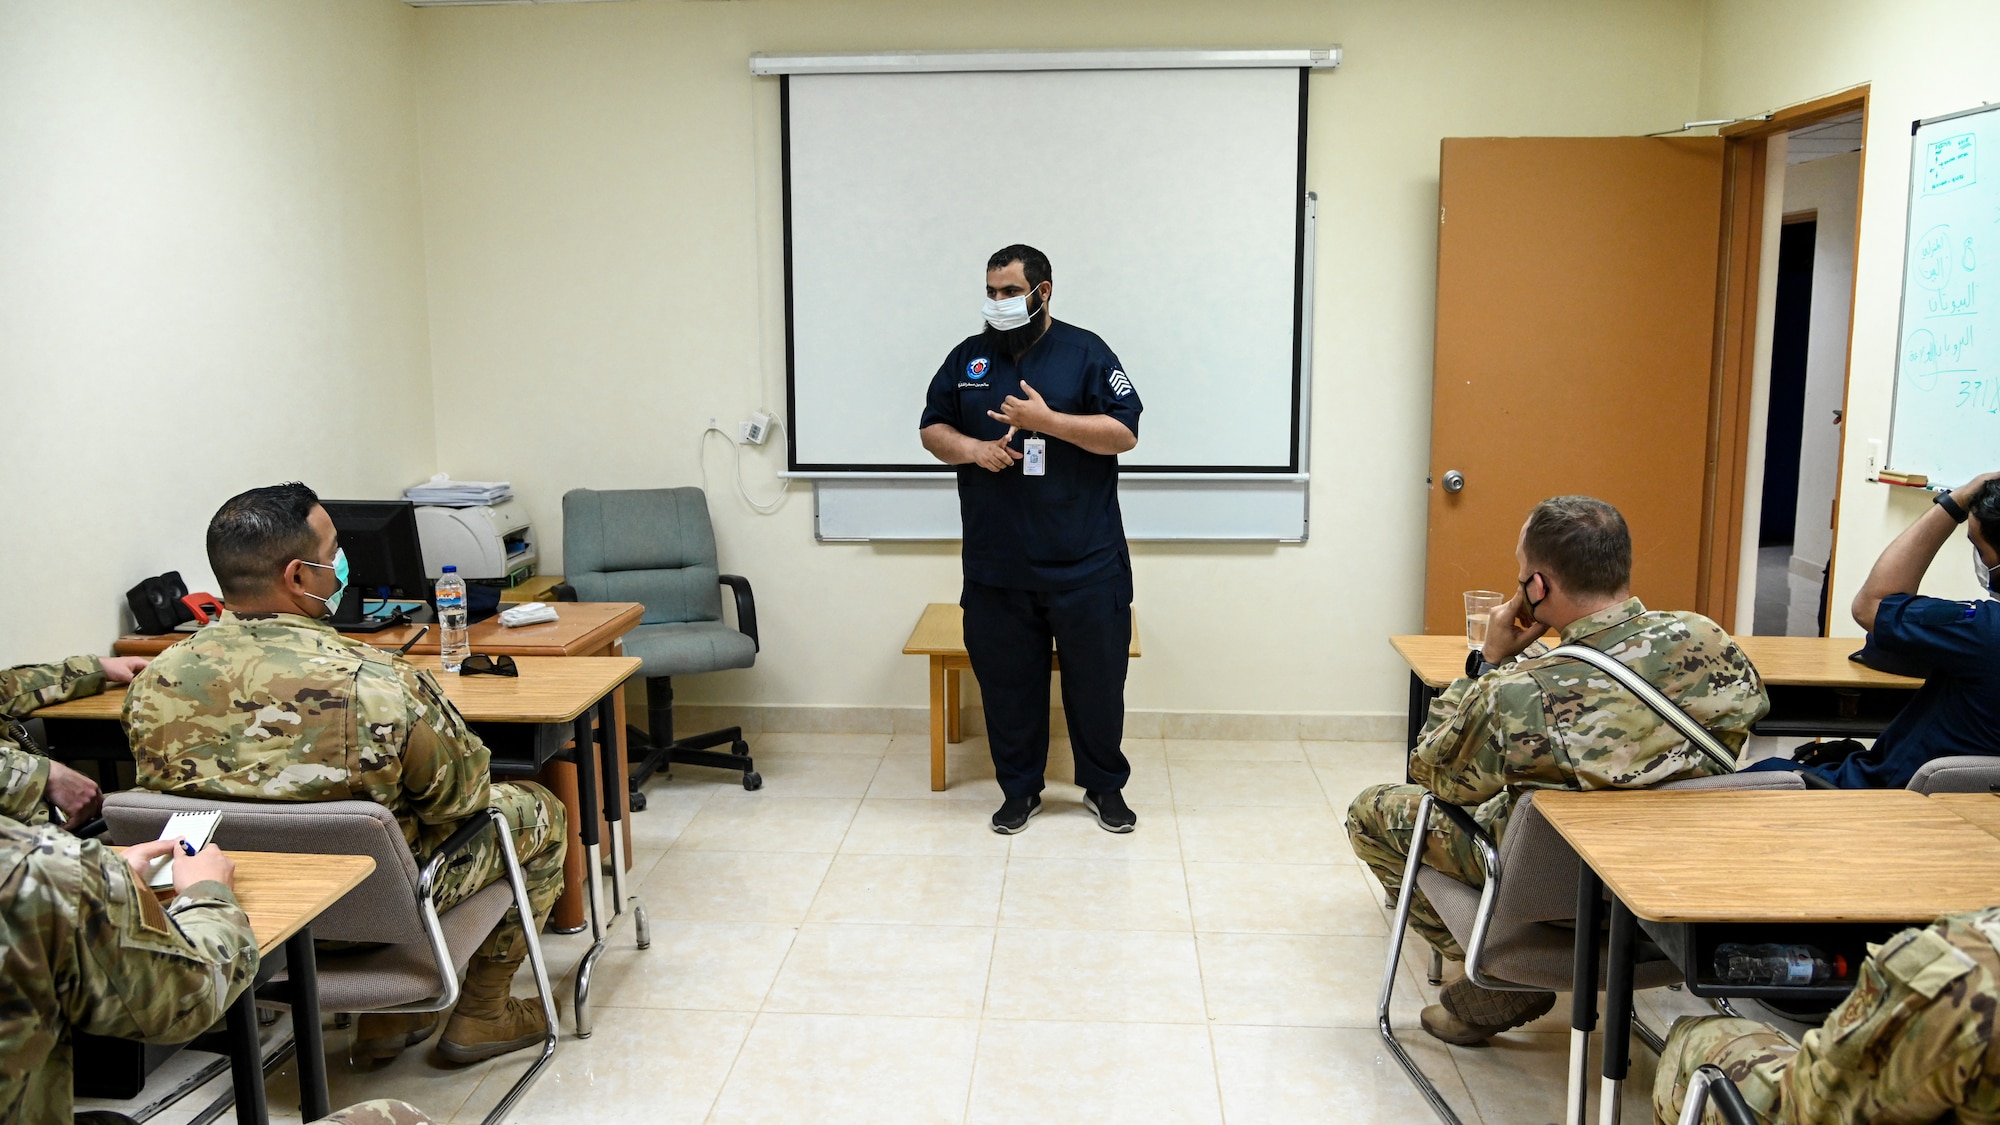 Chief Salem al Shakrh, Royal Saudi Air Force fire chief, briefs members of the 378th Expeditionary Civil Engineer Squadron fire department during an integrated training at Prince Sultan Air Base, Kingdom of Saudi Arabia, Nov. 24, 2021. The briefing explained the administrative structure and operational capabilities of the RSAF fire department. (U.S. Air Force photo by Staff Sgt. Christina Graves)